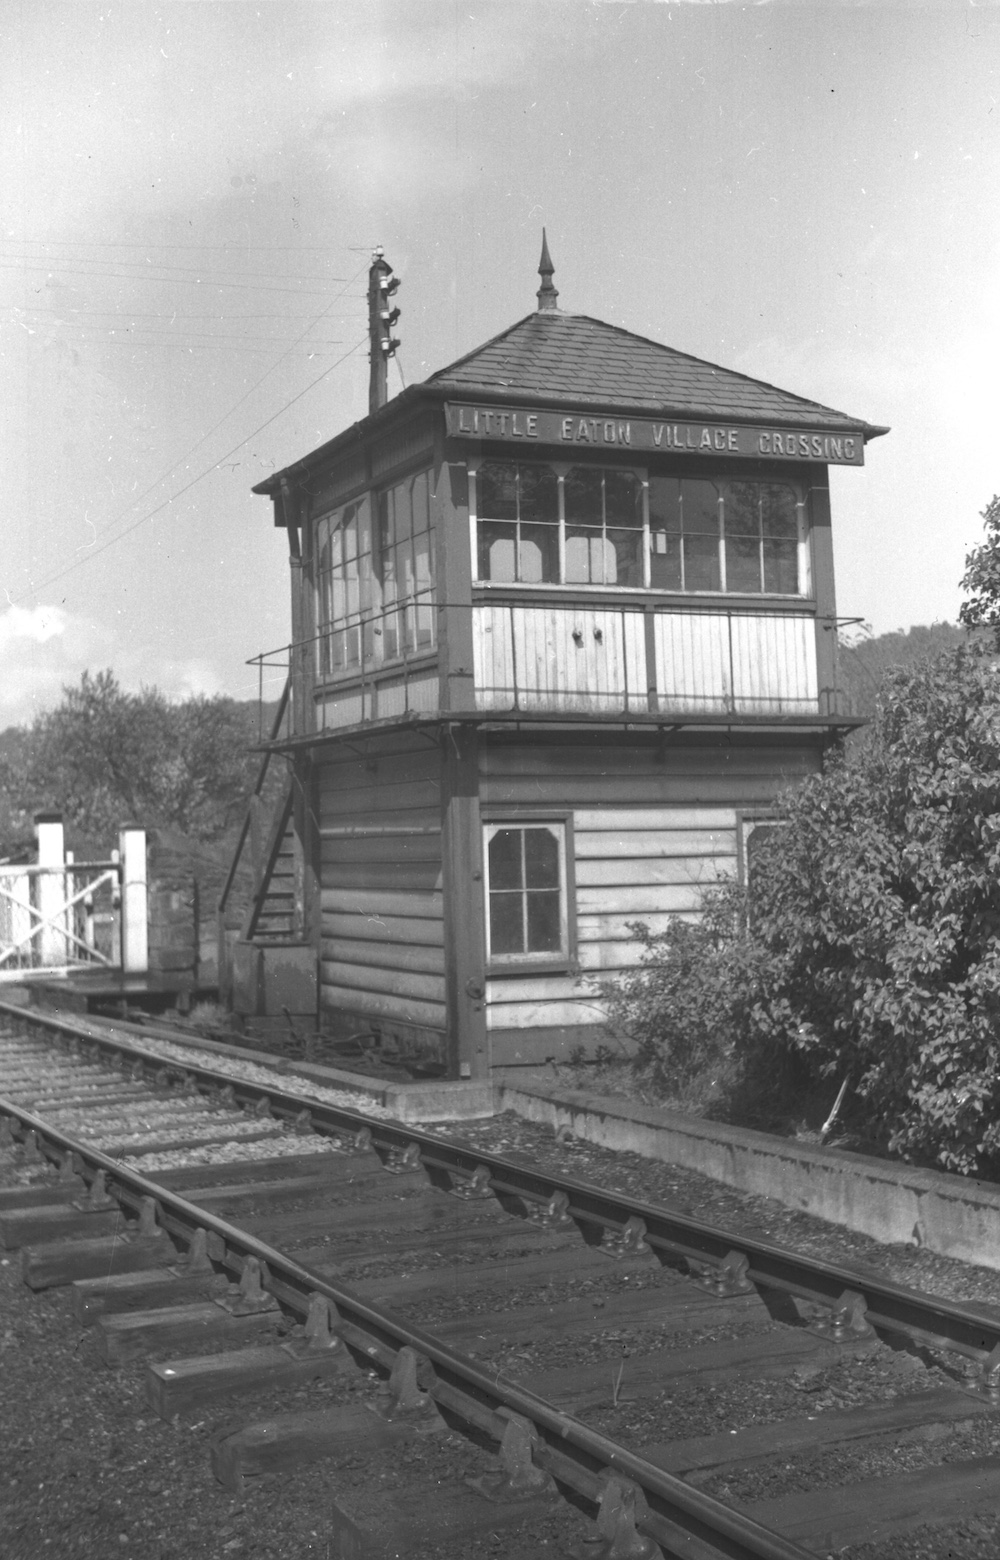 Little Eaton Village Crossing signal box viewed from the track at the north end about 1965 by Pat Larkam - MRSC collection